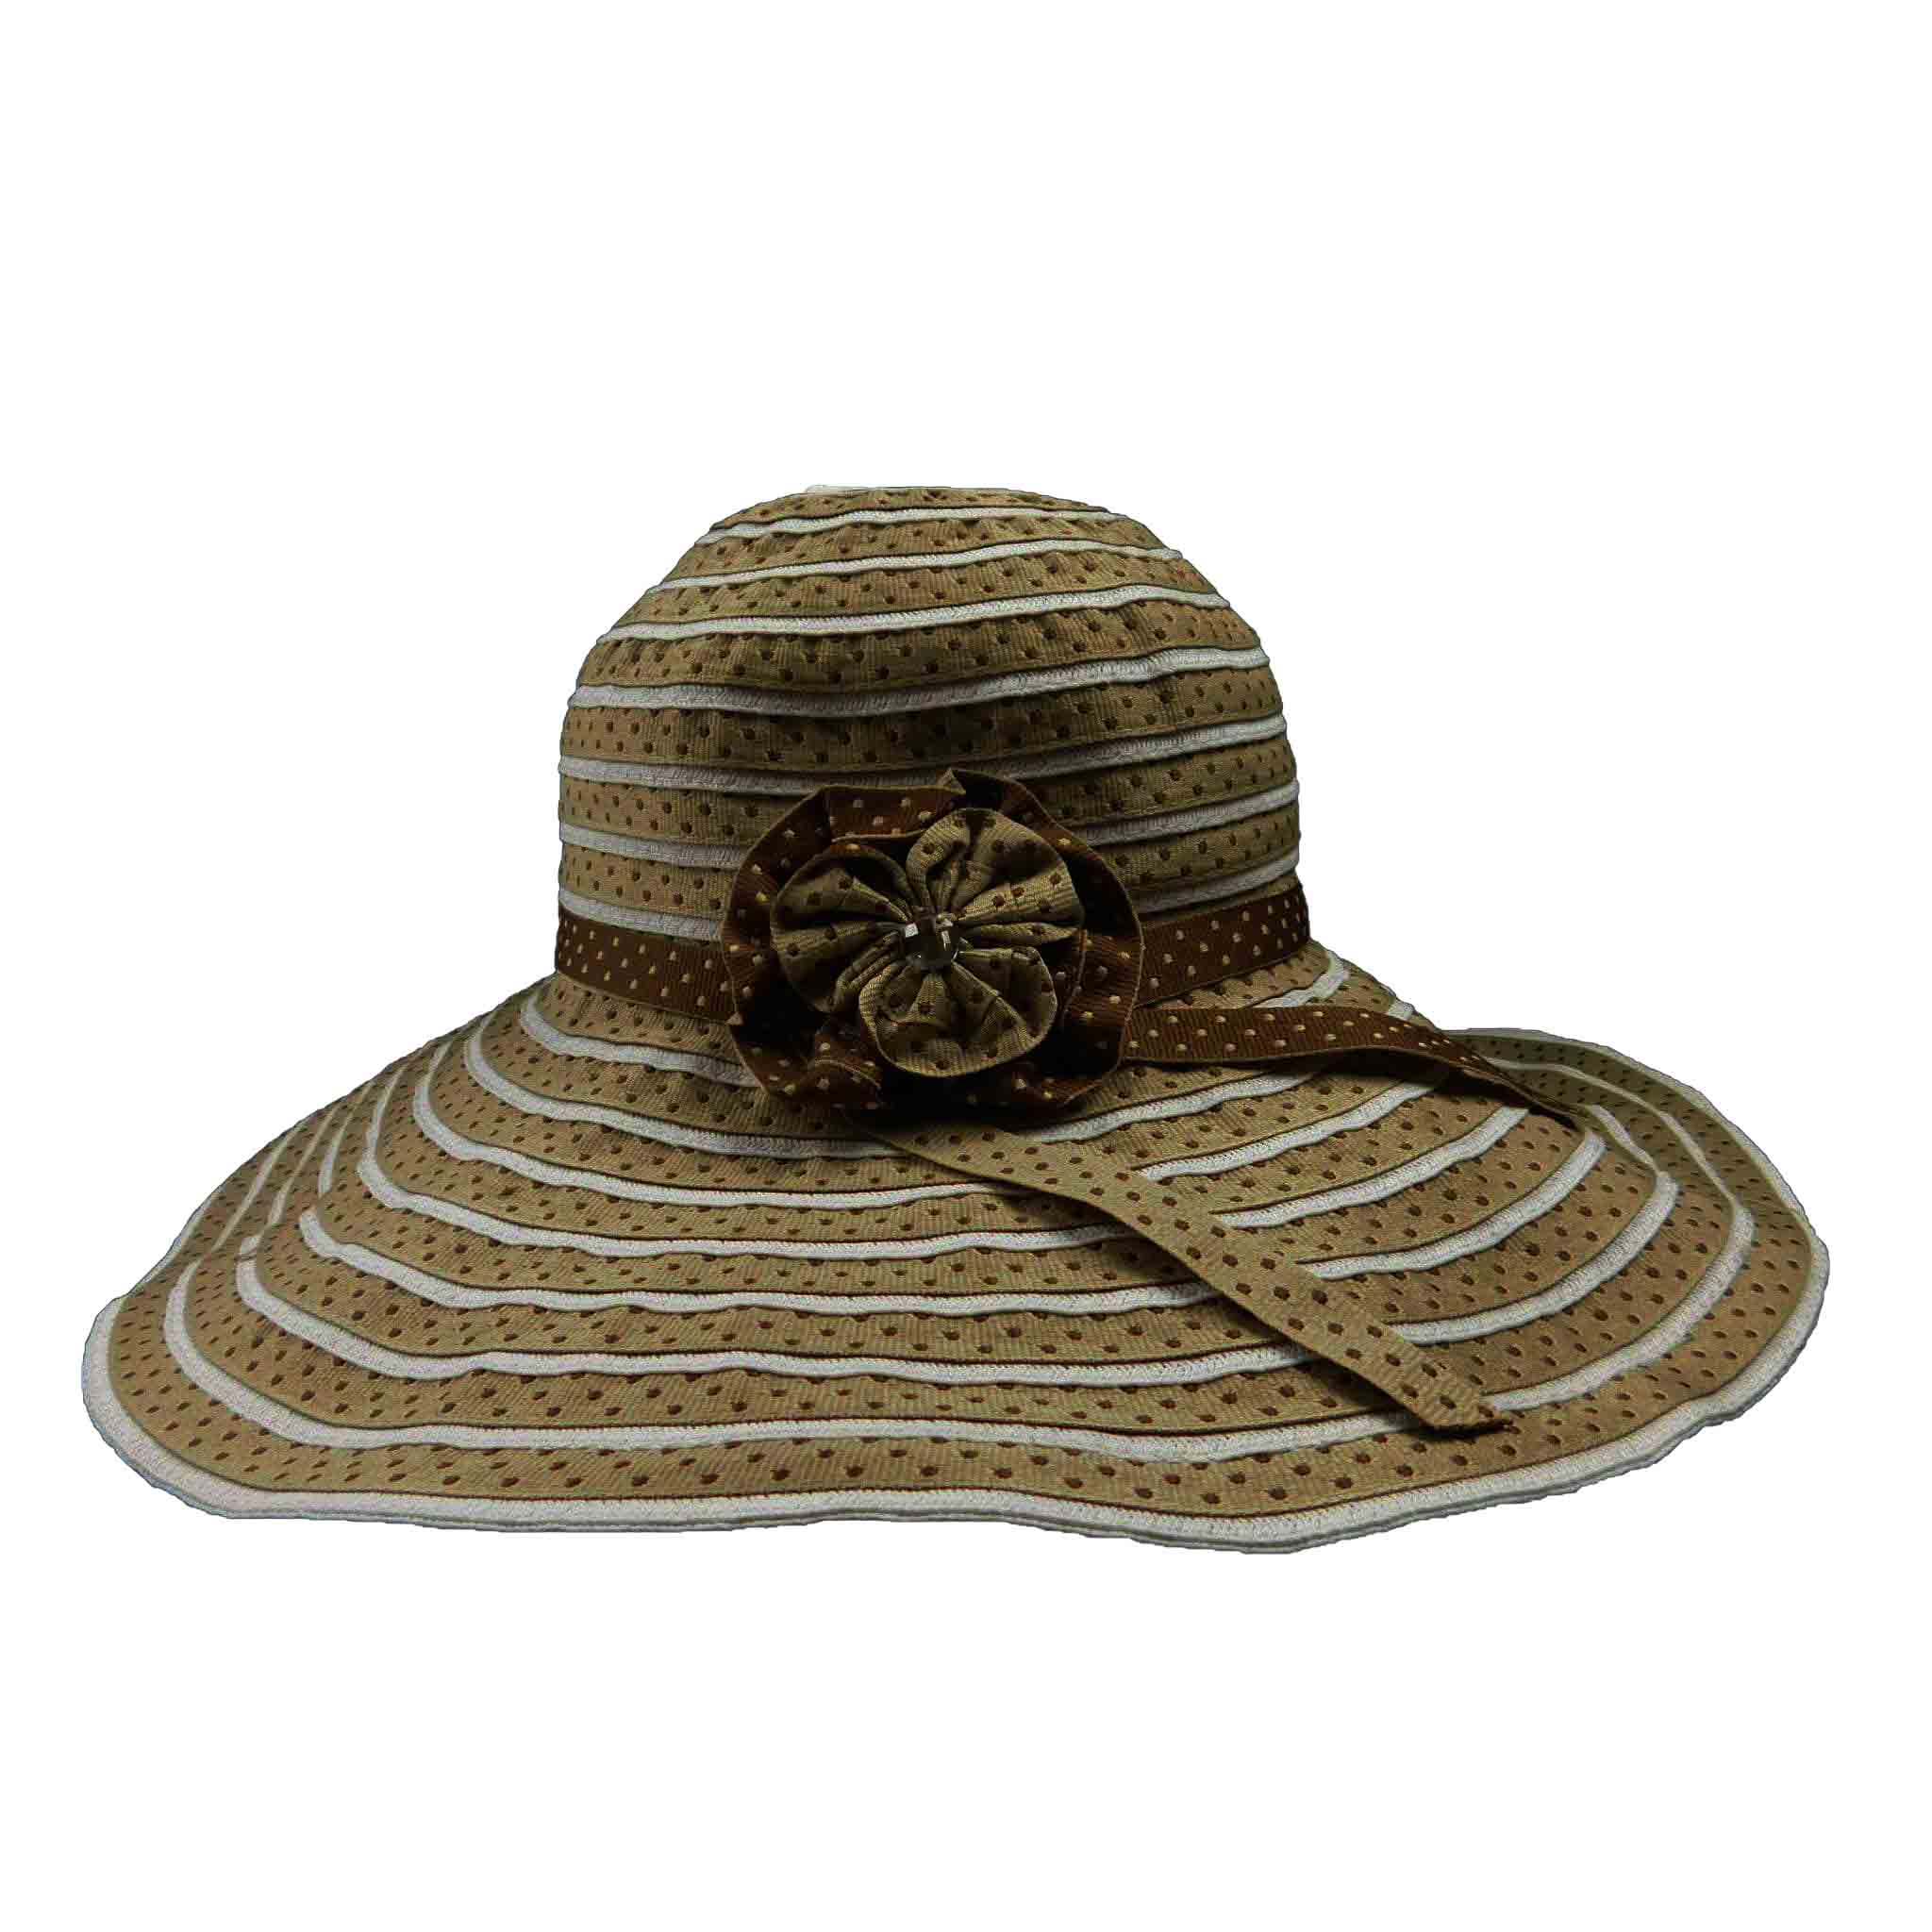 Polka Dot Ribbon Sun Hat with Straw Braids - Jeanne Simmons Hats Wide Brim Sun Hat Jeanne Simmons JS9515-TAN Taupe  